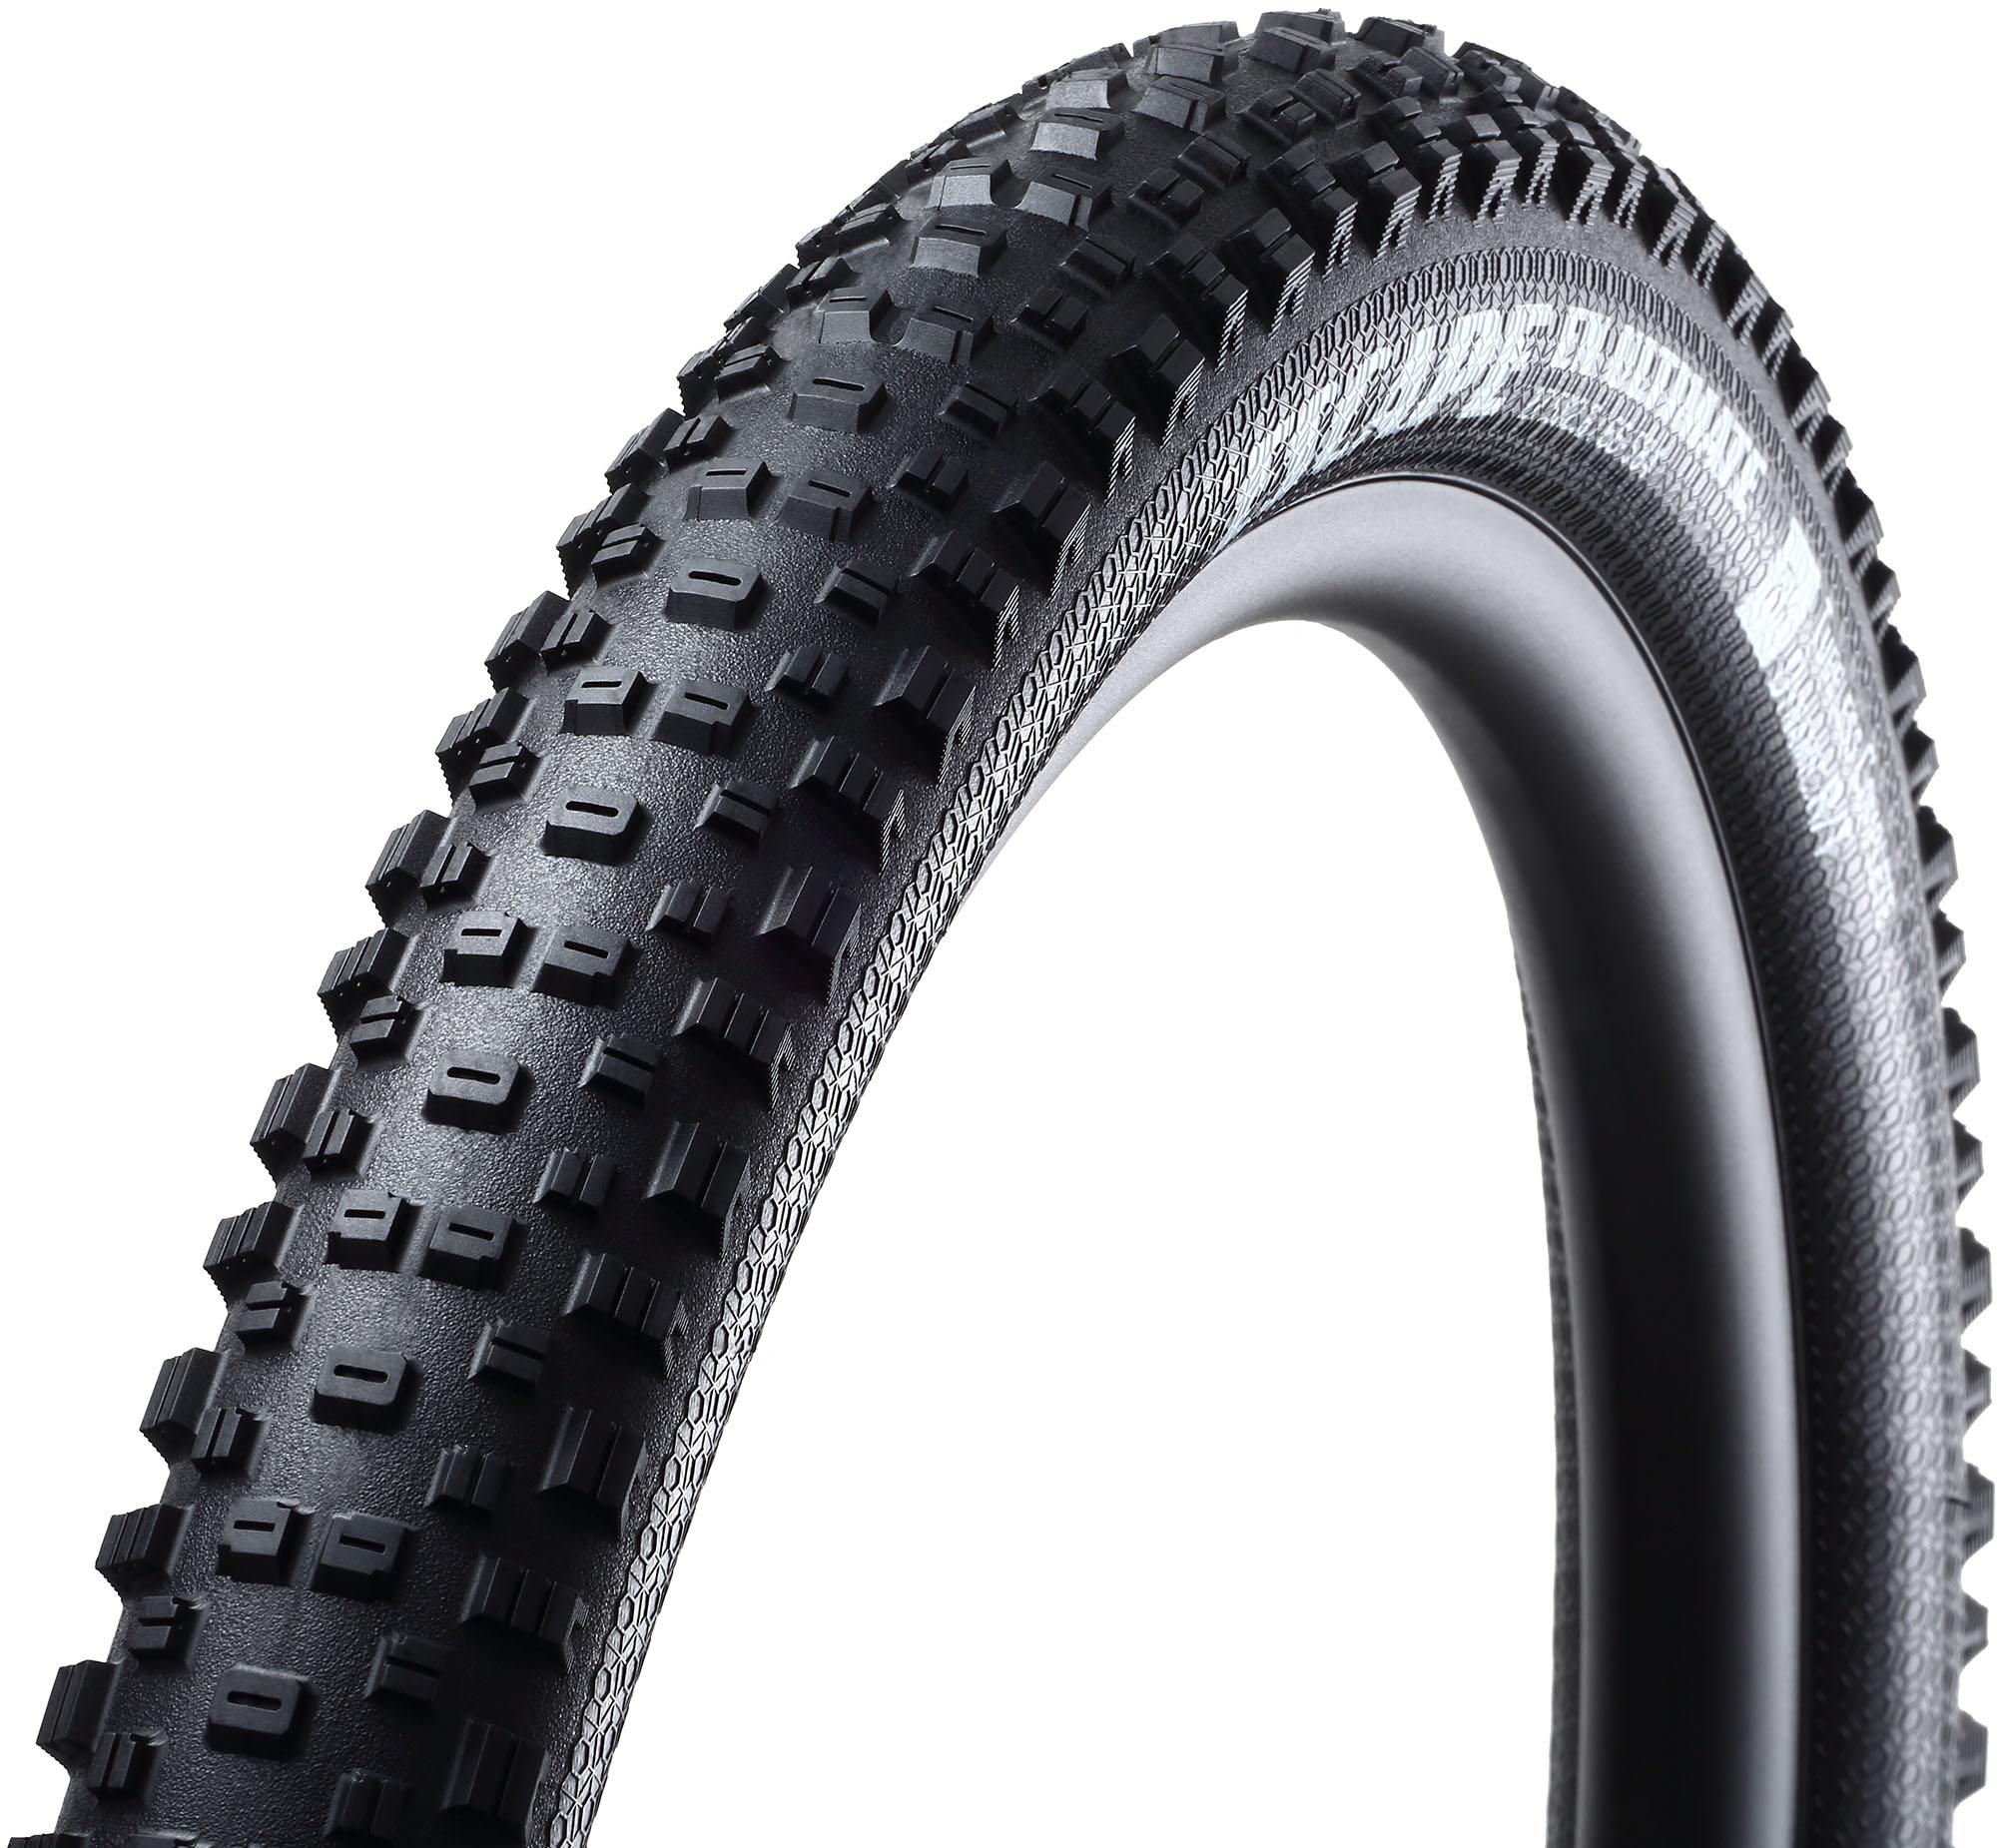 Goodyear Escape Ultimate Complete Tubeless Mtb Tyre - Black